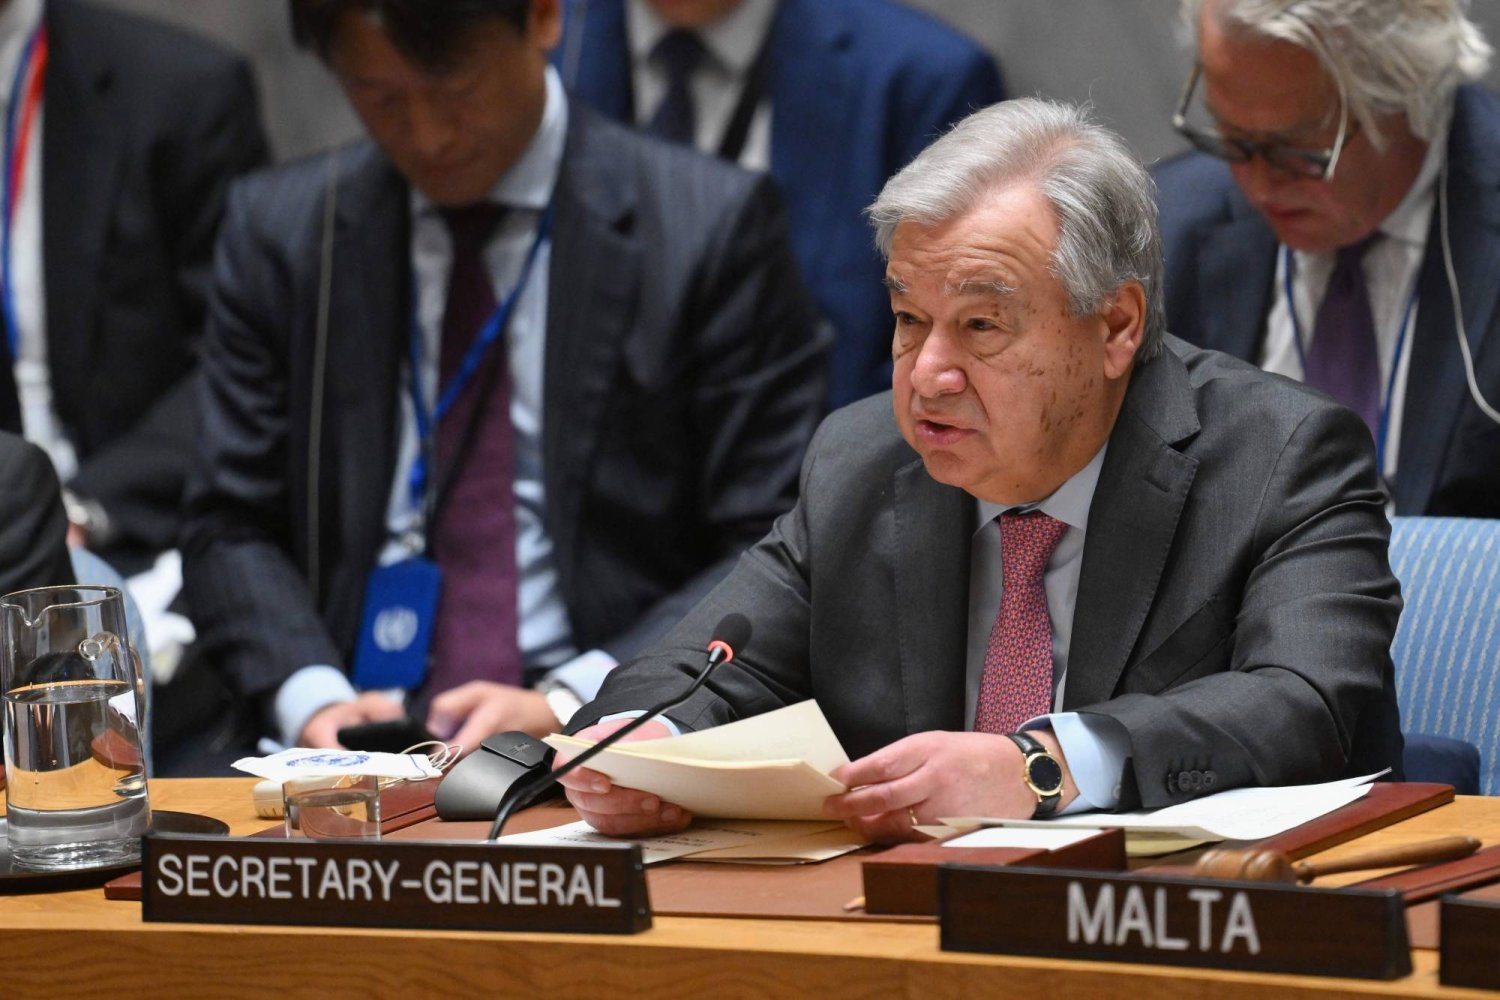 UN Secretary-General Antonio Guterres speaks during a Security Council meeting on the situation in the Middle East, including the Palestinian question, at UN headquarters in New York City on April 18, 2024. (Photo by ANGELA WEISS / AFP)